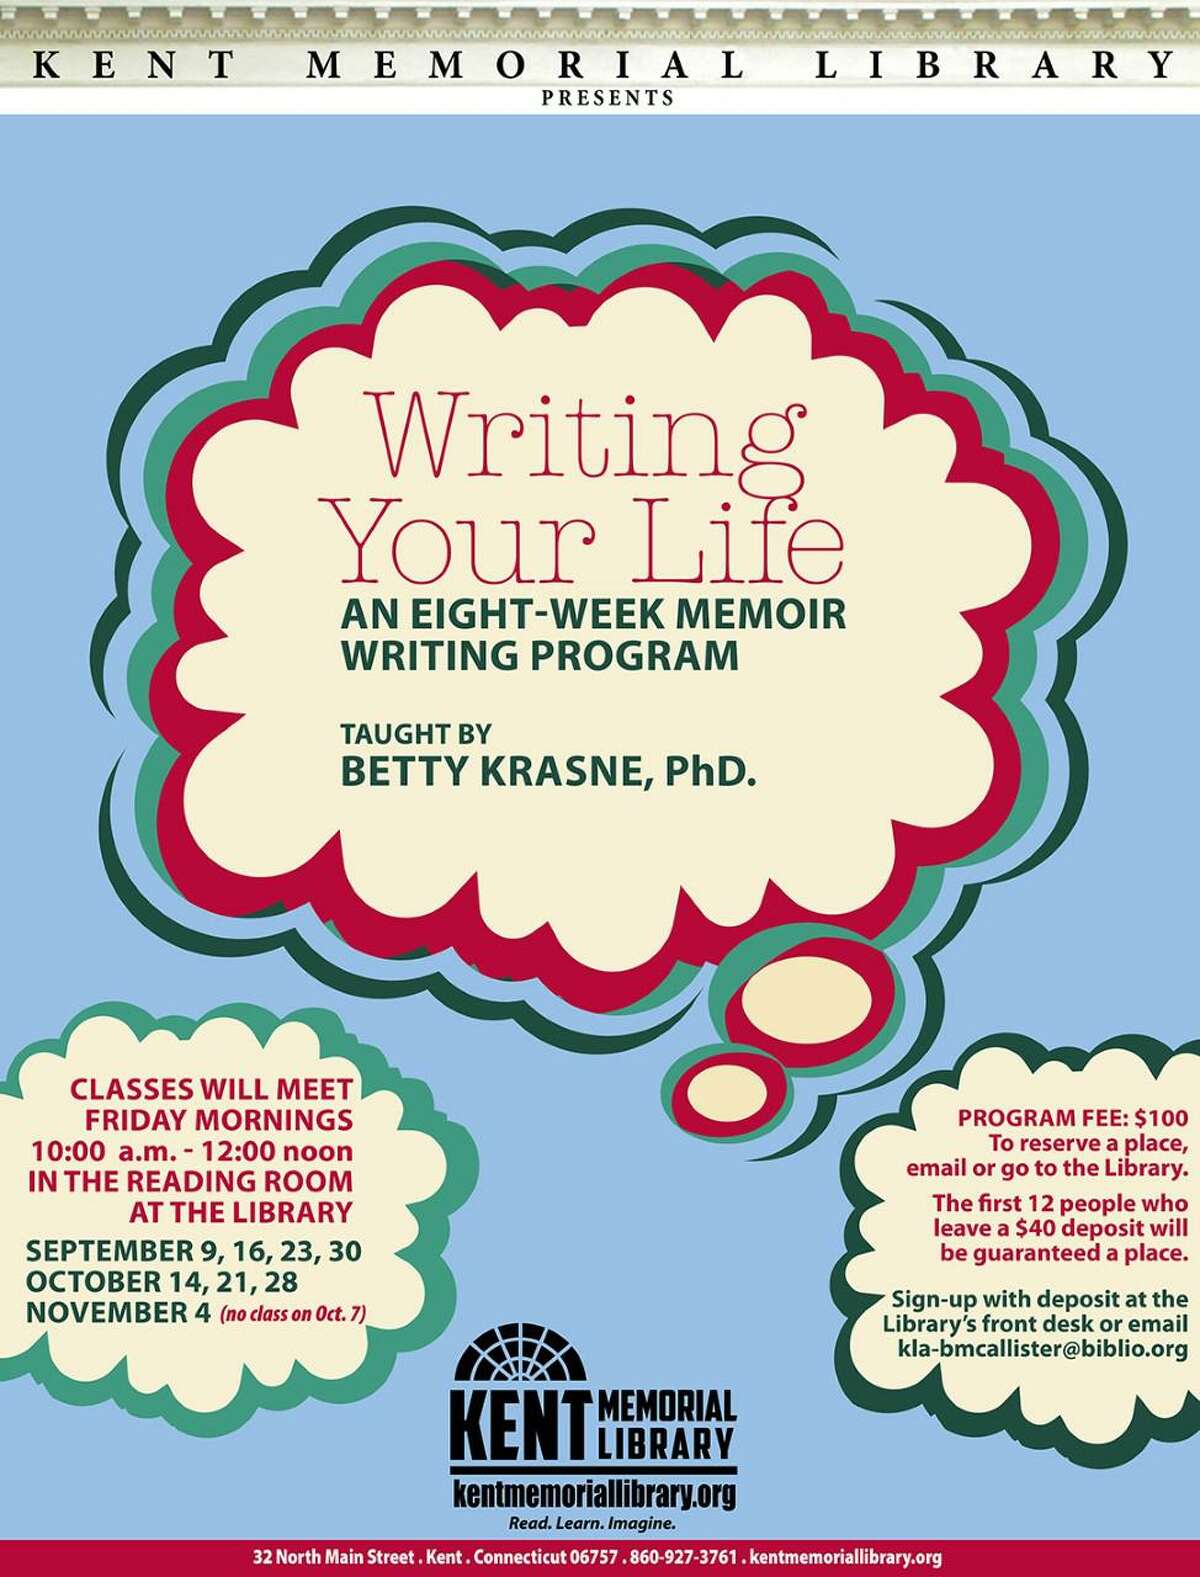 There will be an upcoming, and eight week memoir writing program being taught by author of poems, articles, and seven books, Betty Krasne, Ph.D., who is also a Doctor of Philosophy, at the Kent Memorial Library.  A flyer for the program is shown.